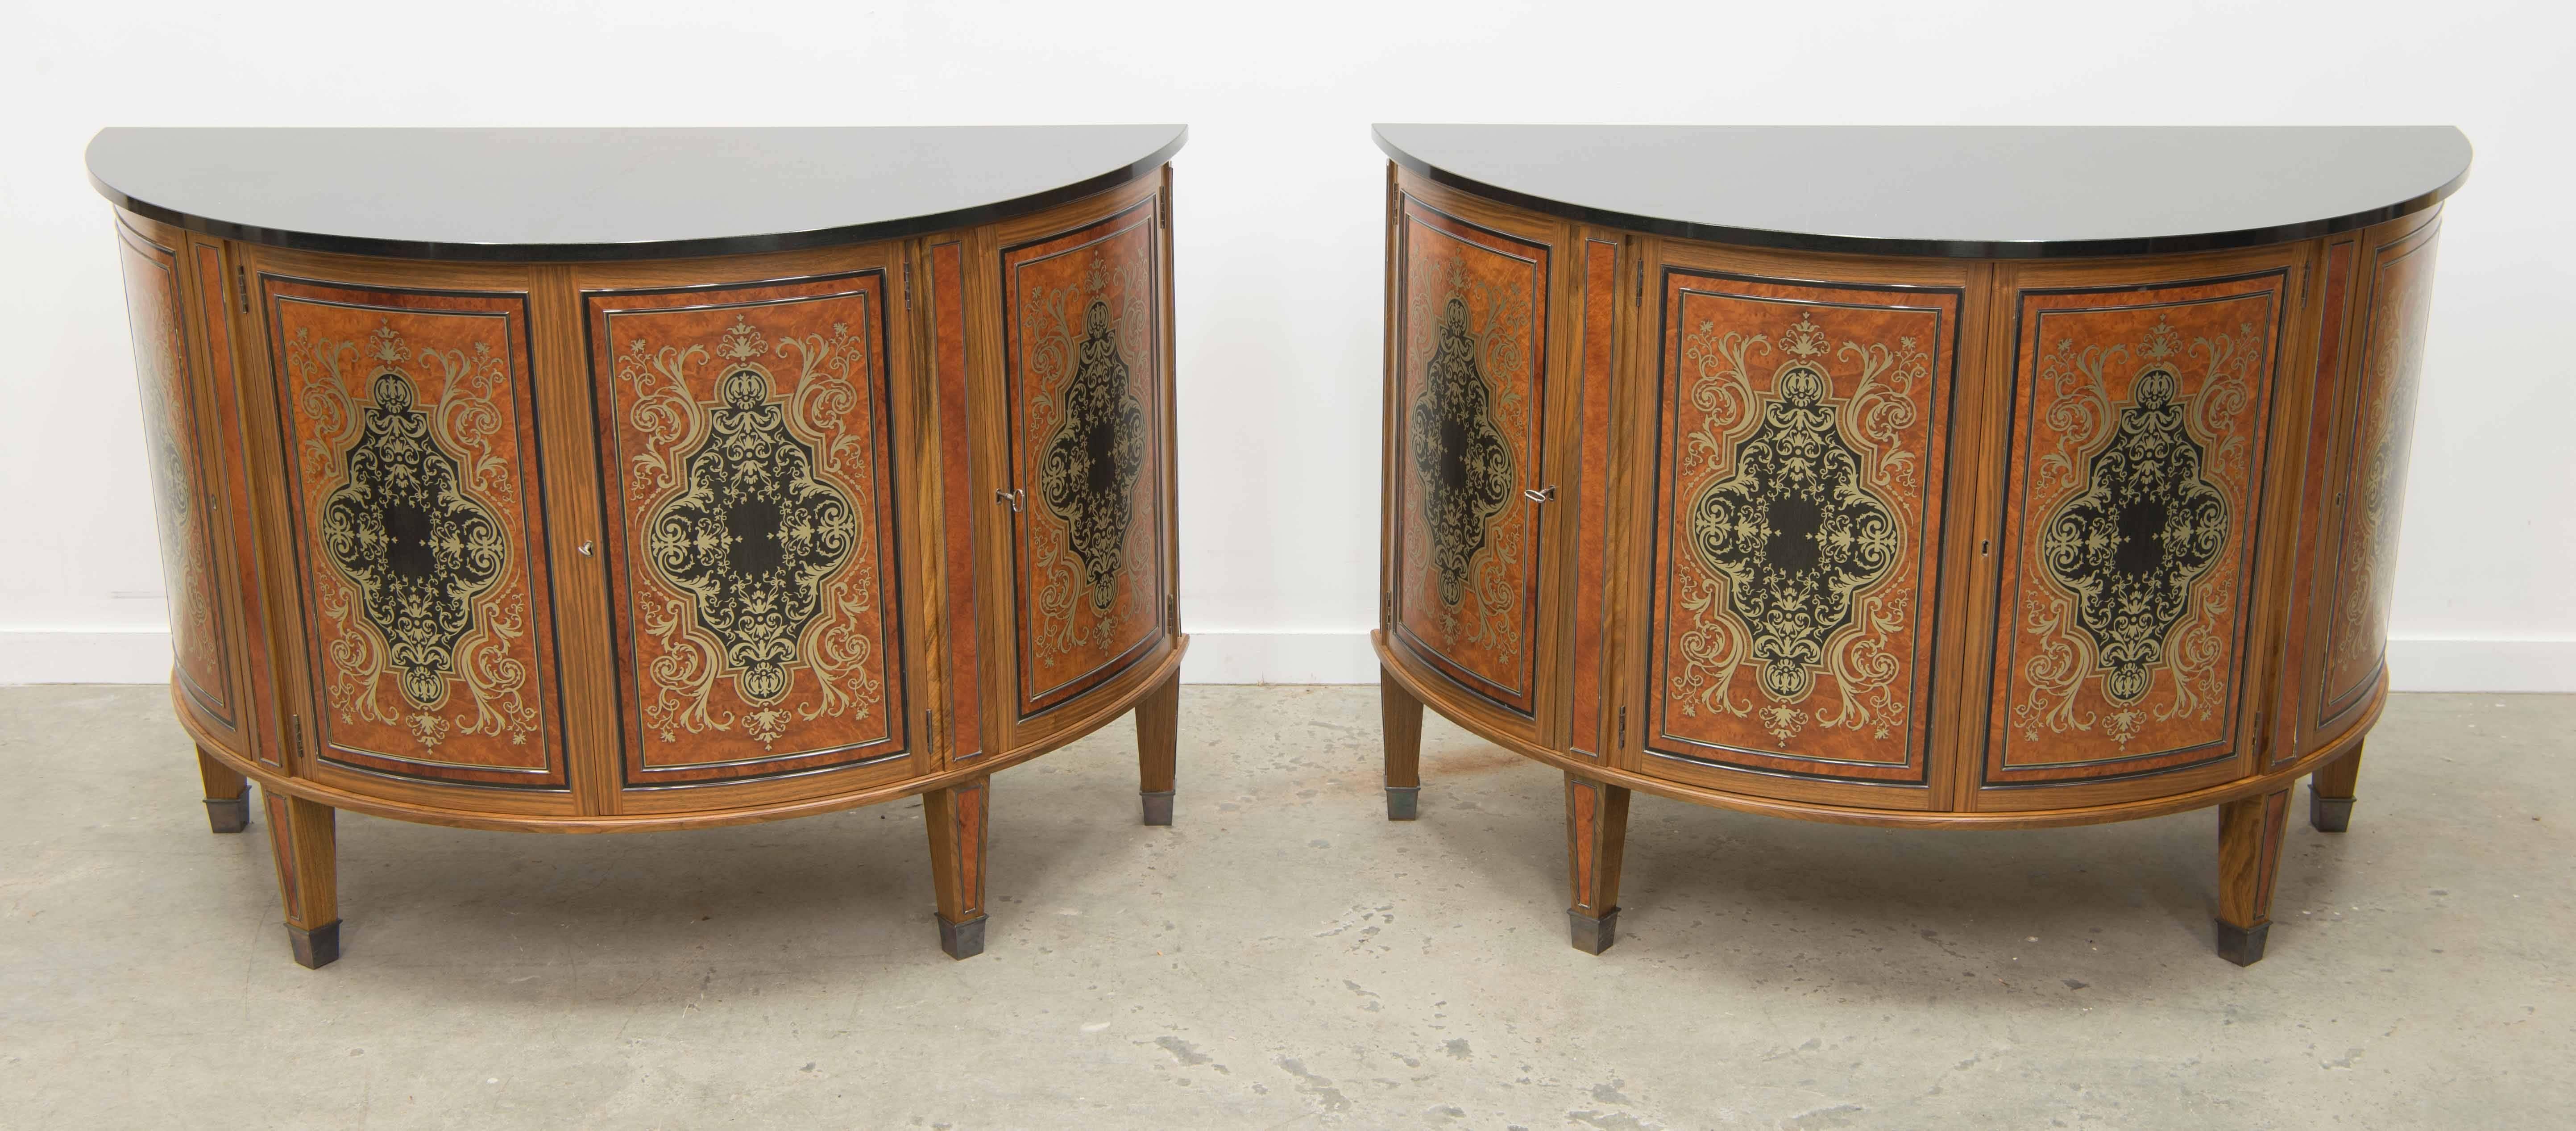 This is an extraordinary pair of David Linley commodes. 

They are an exact pair of demilune commodes with black marble top. They both have four doors with Boulle inlay in different kinds of wood and silver inlay. Inlay is made of English walnut,